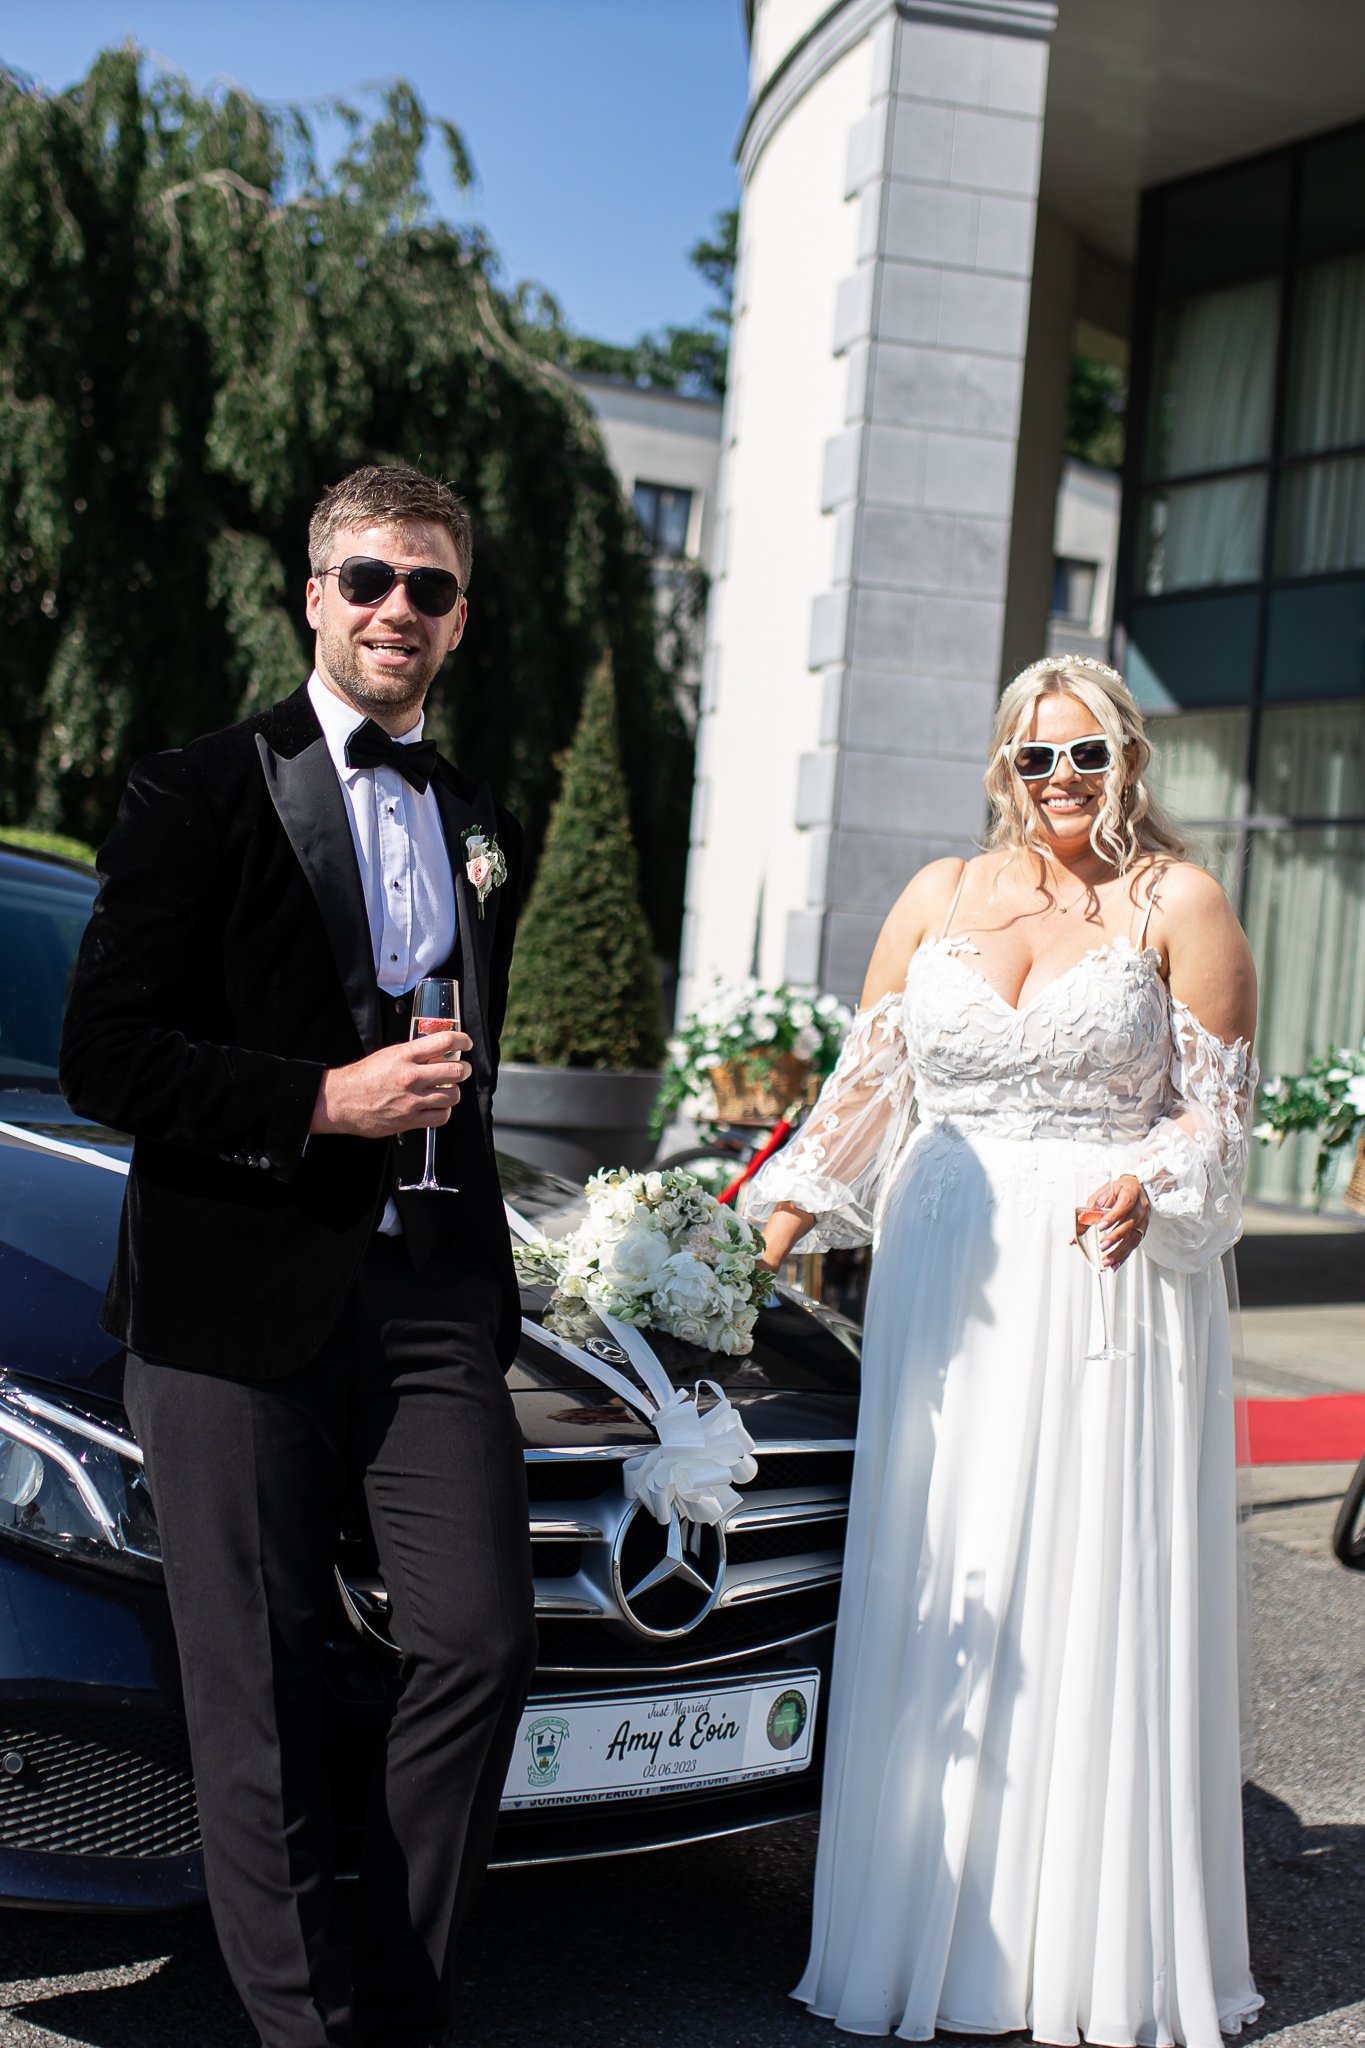 Bride and groom arrive at Newpark Hotel in style in a luxury vintage car. Magical summer wedding at Newpark Hotel in 2023.